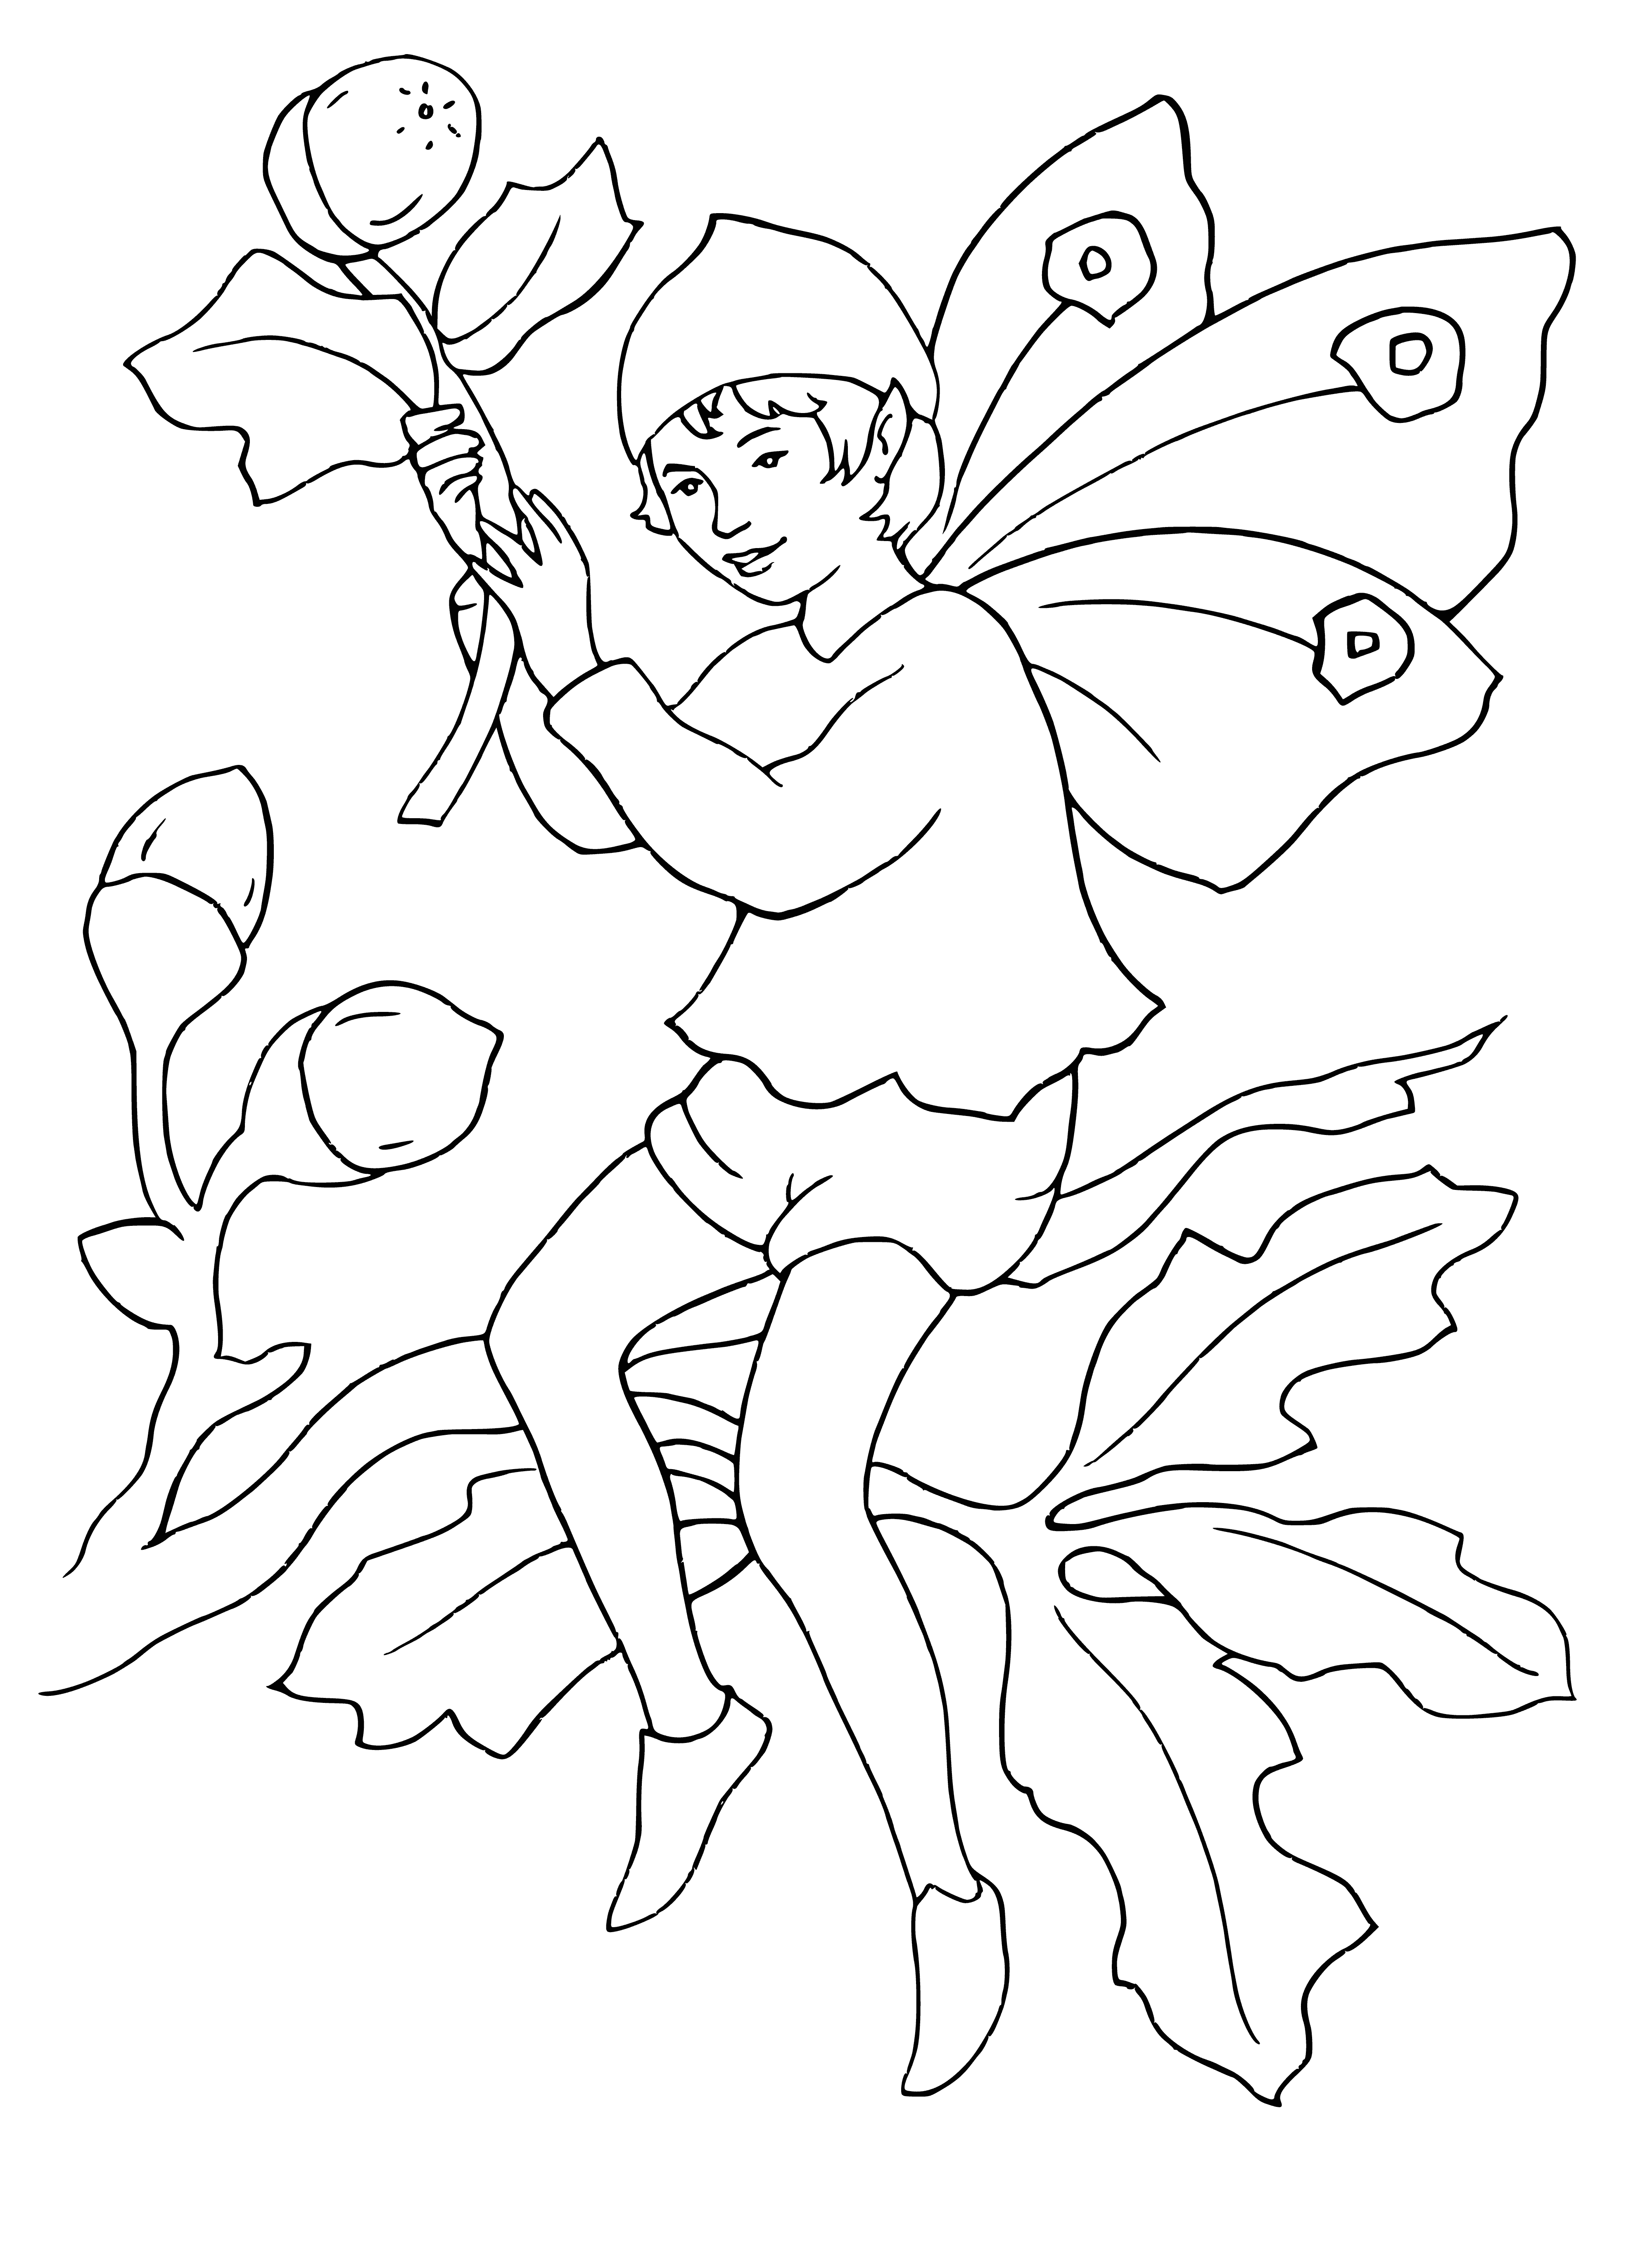 Elf on a branch coloring page